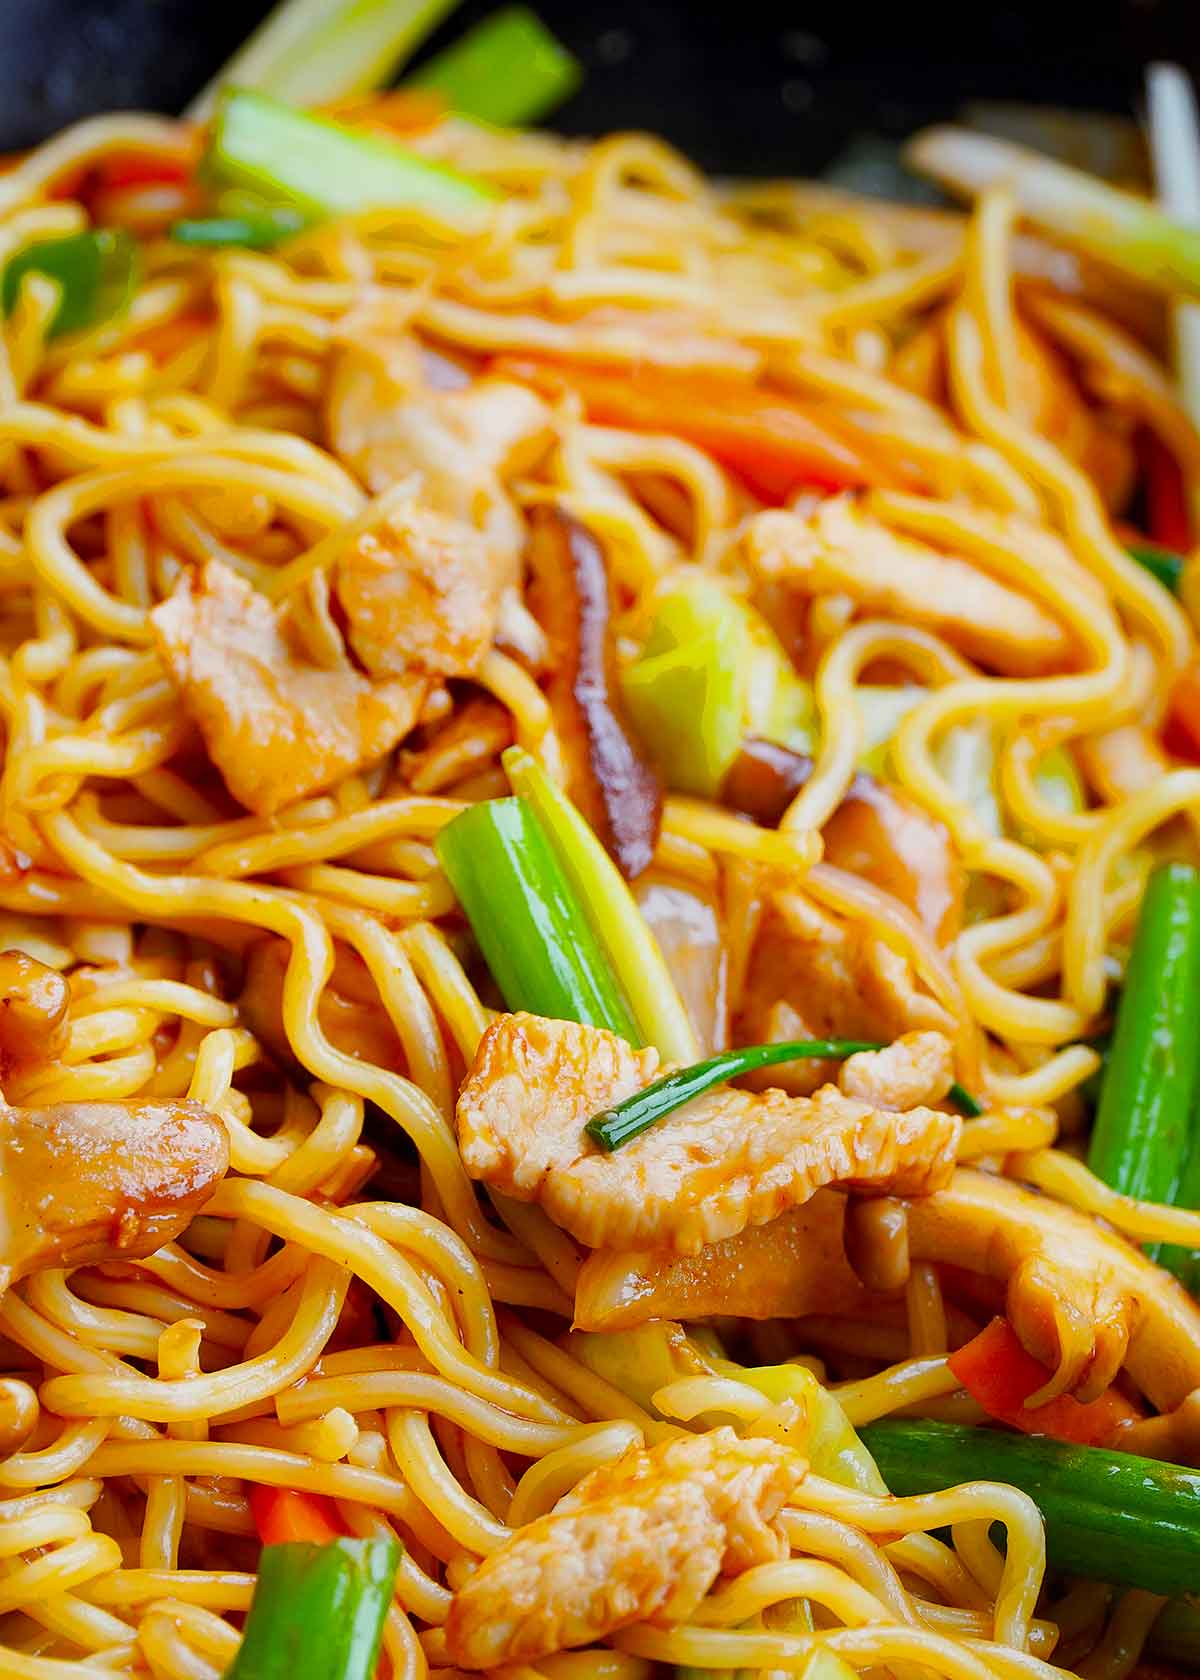 A black wok containing, stir fried Japanese noodles with chicken slices and vegetables.